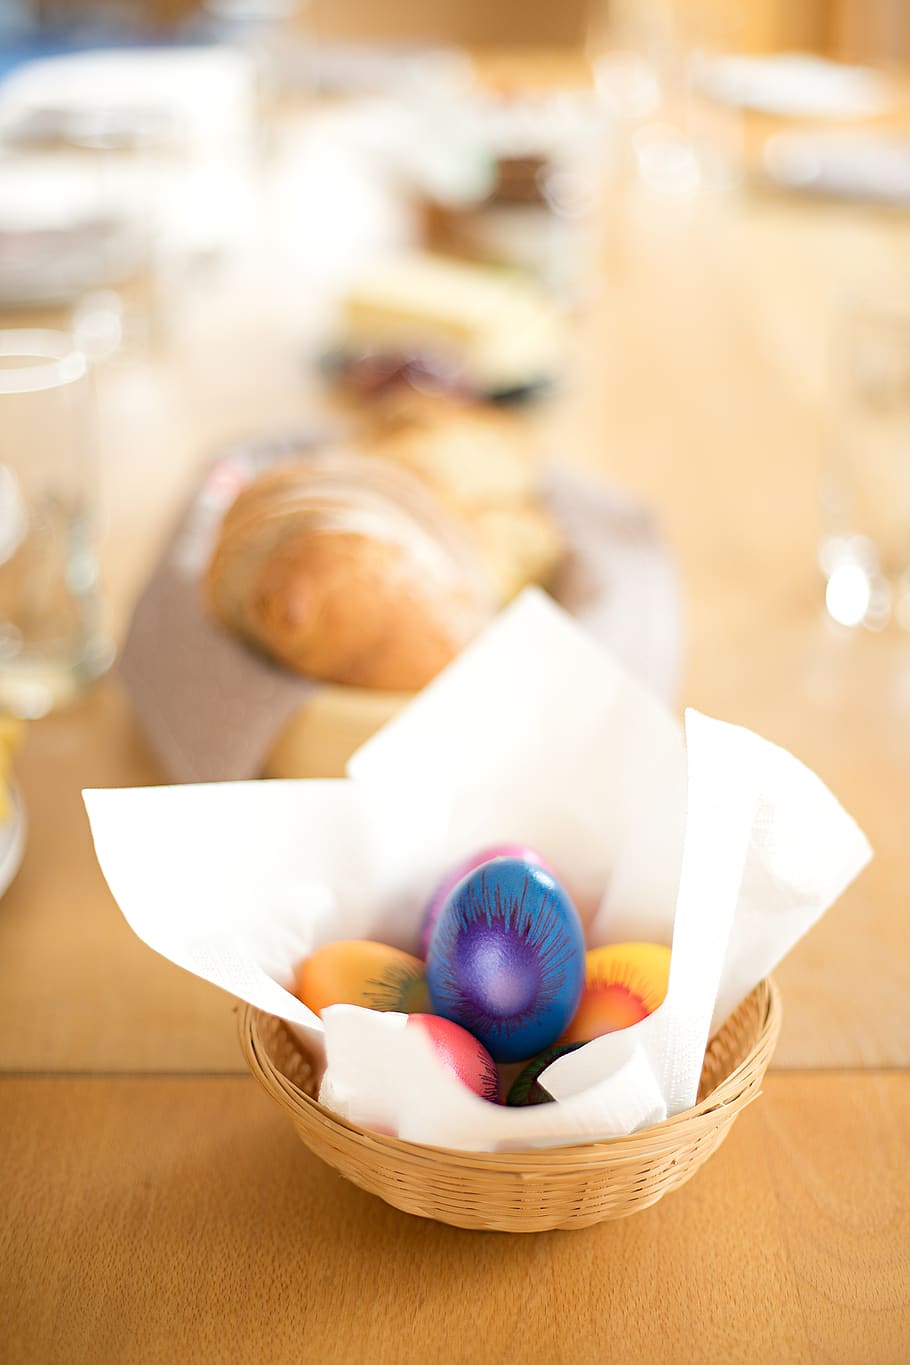 egg, colorful, table, basket, brown, food, easter, food and drink, still life, container